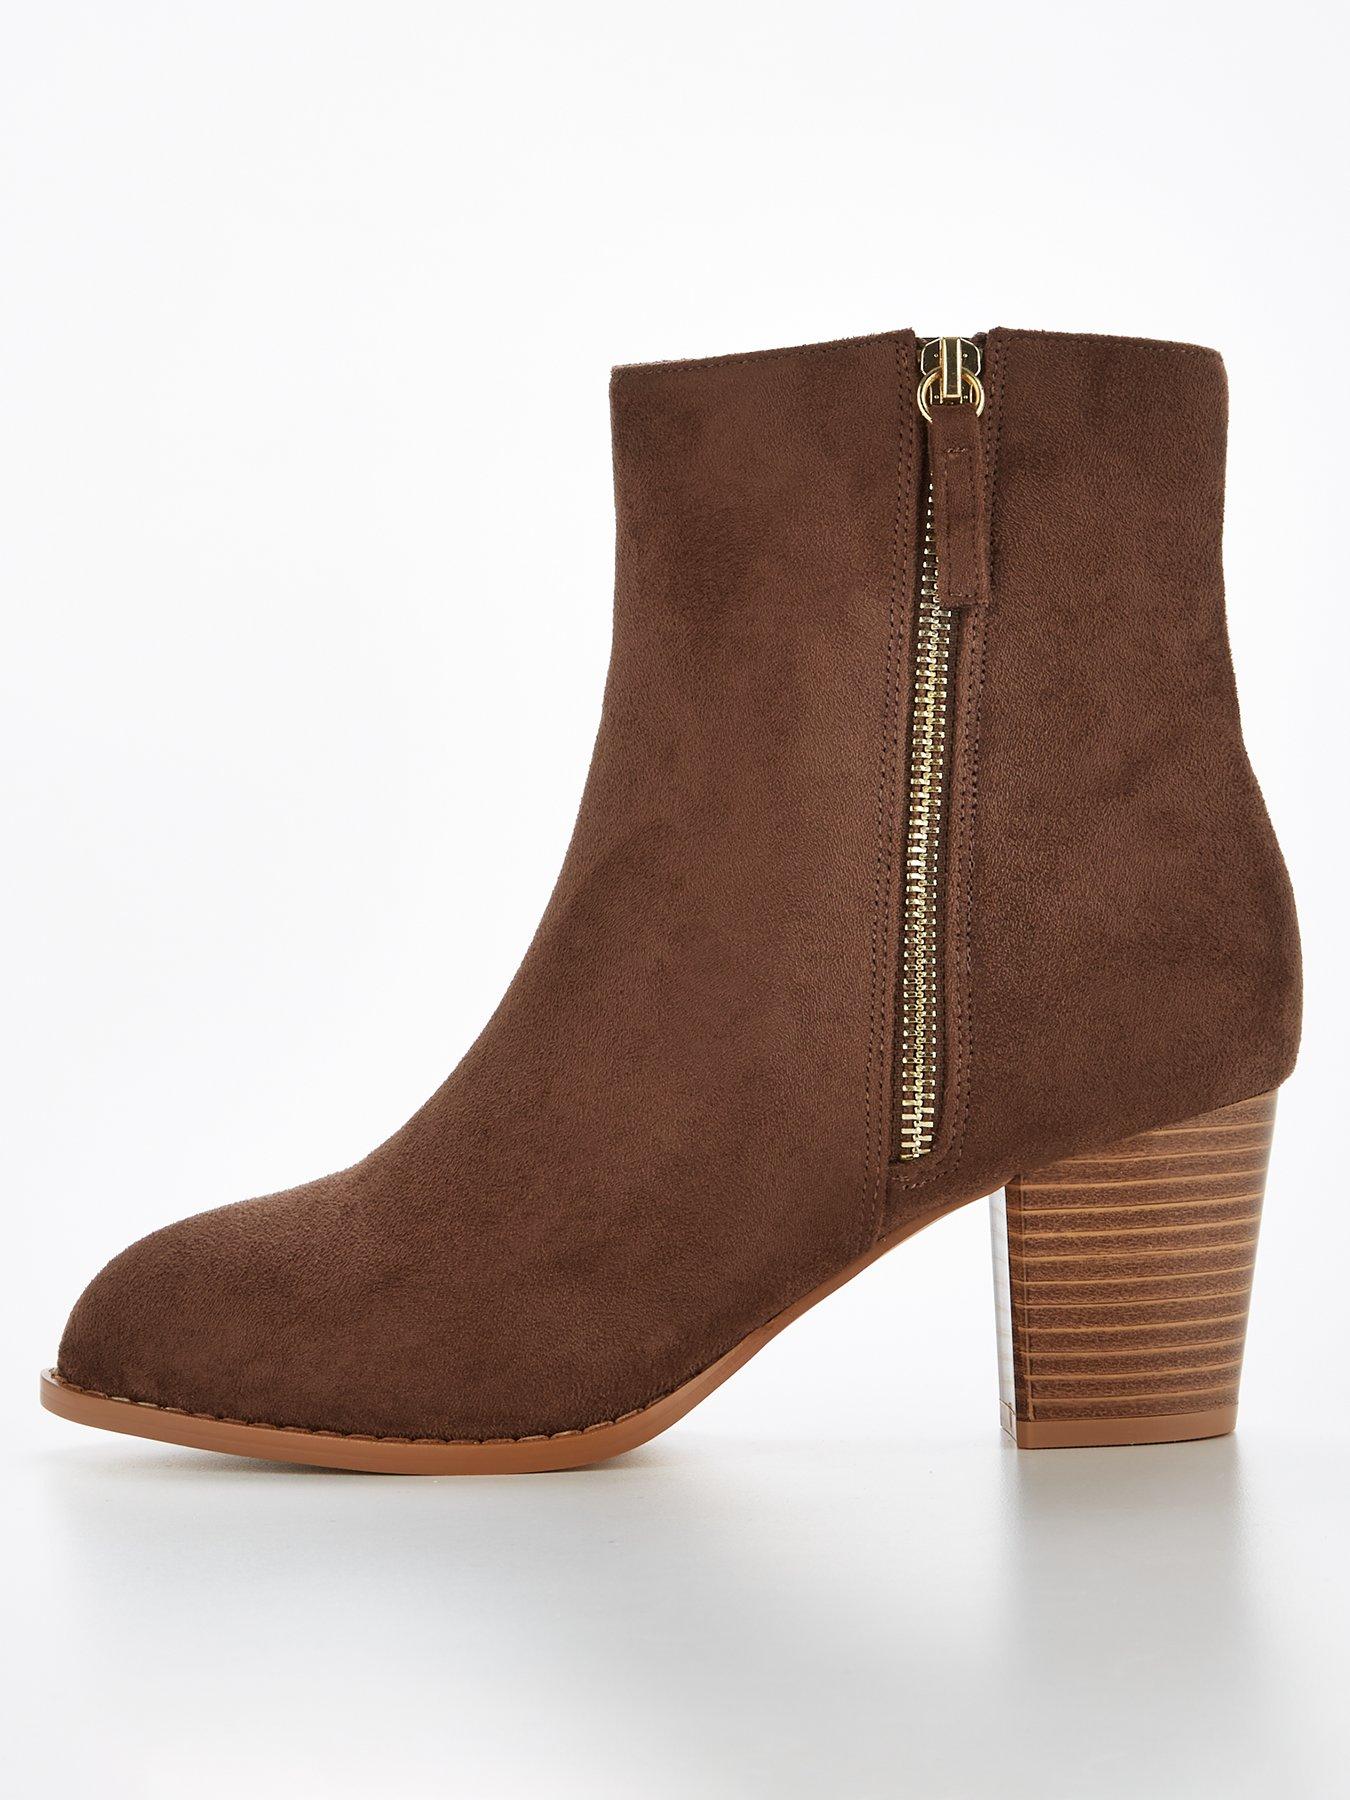 Ankle Boots | Heeled, Lace Up & Chelsea Boots for Women | Very.co.uk